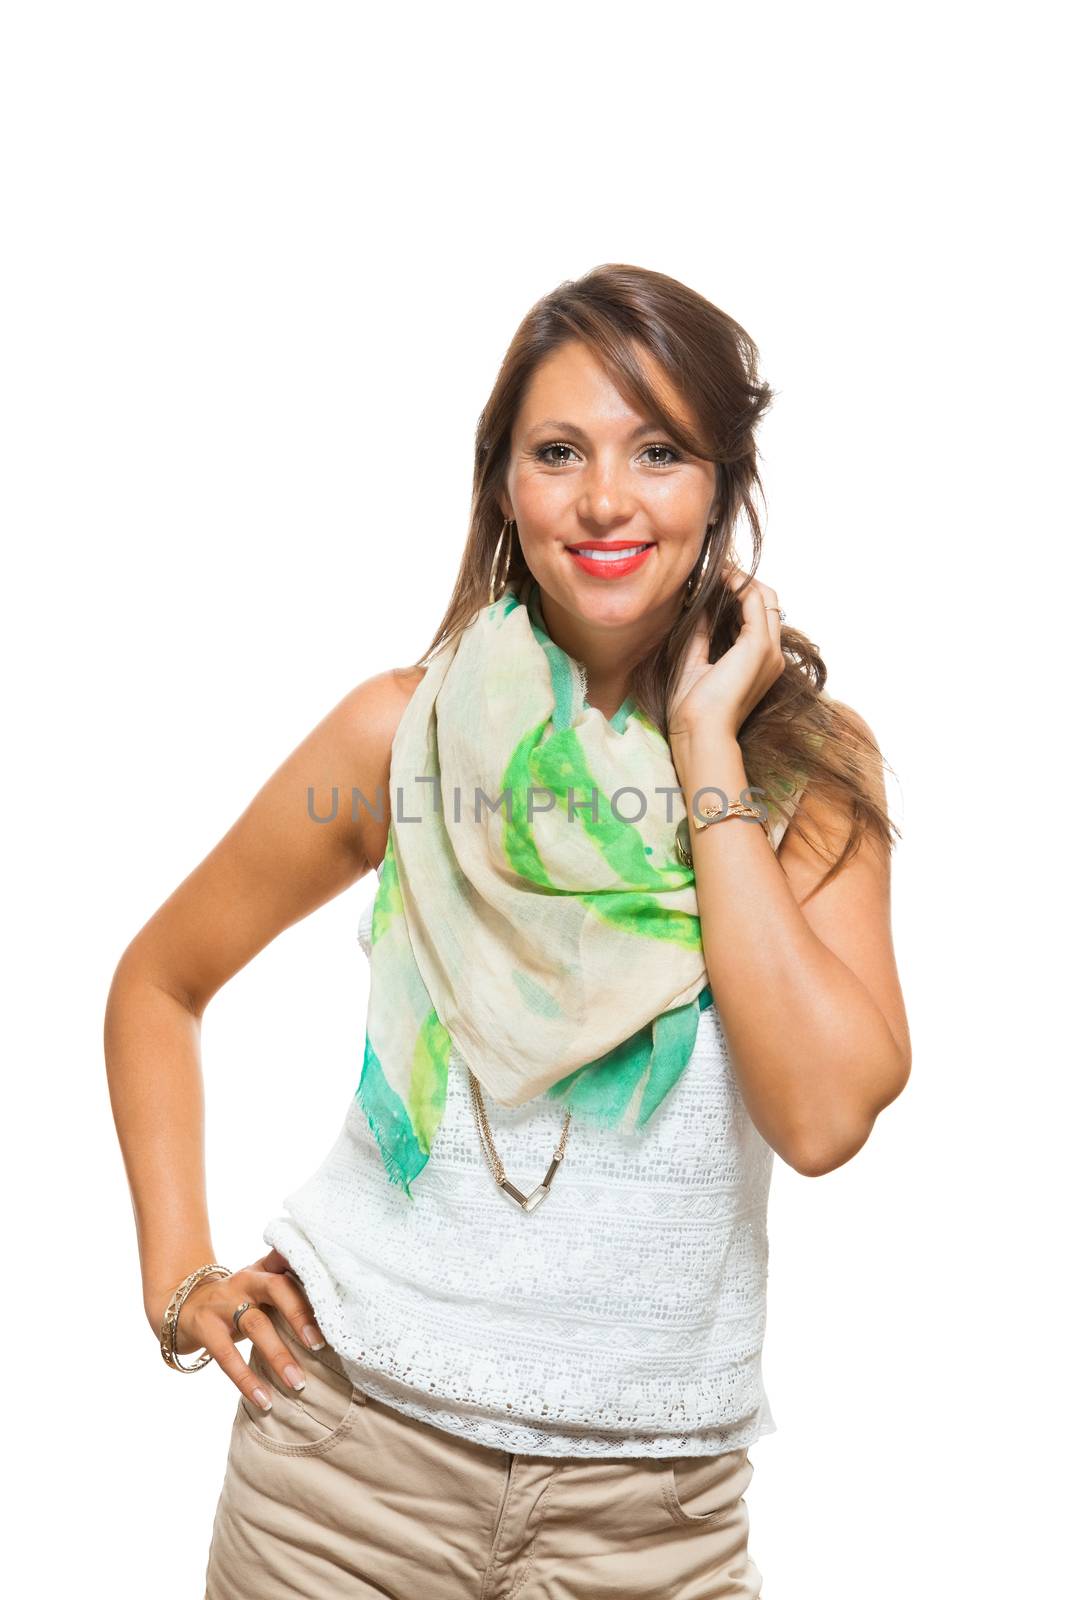 Close up Cheerful Pretty Young Woman in White Sleeveless Shirt with Scarf, Smiling at the Camera While Holding her Waist, Isolated on White Background.